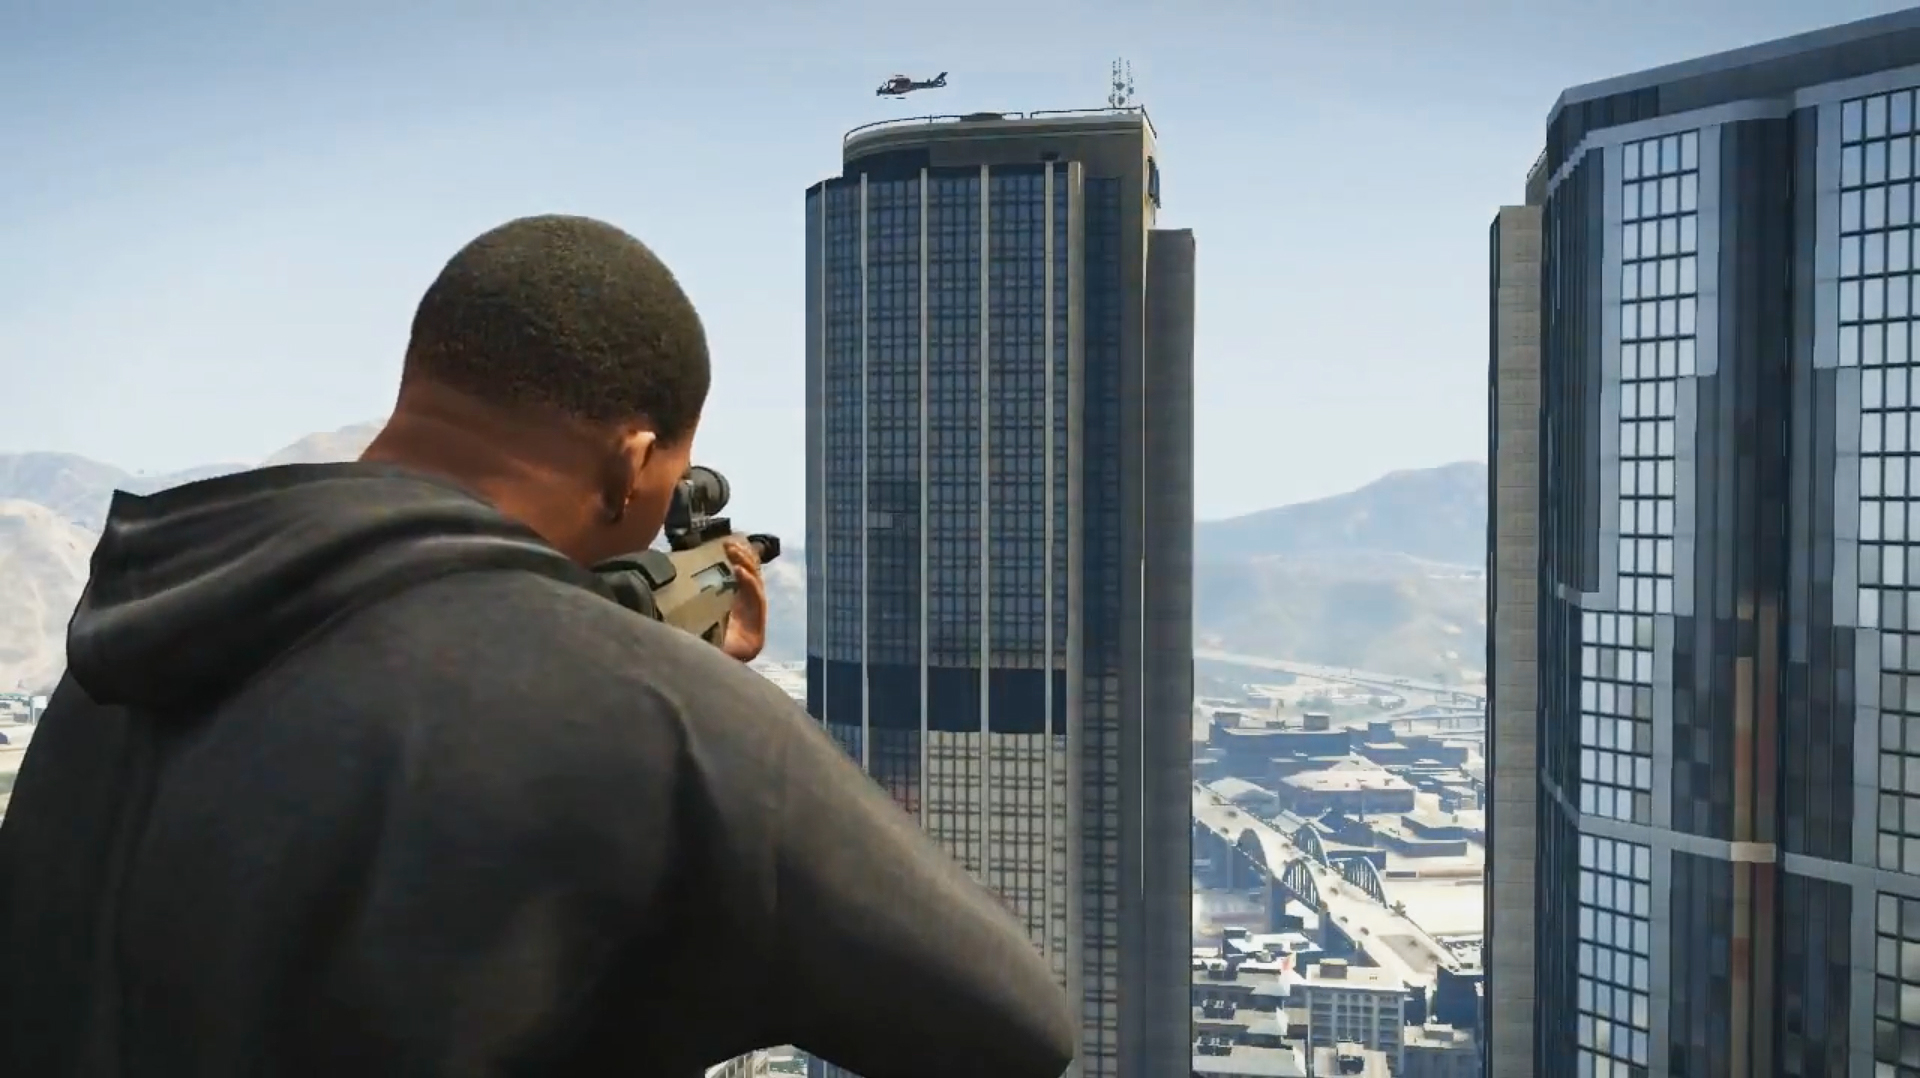 first-grand-theft-auto-v-gameplay-video-released-6.jpg